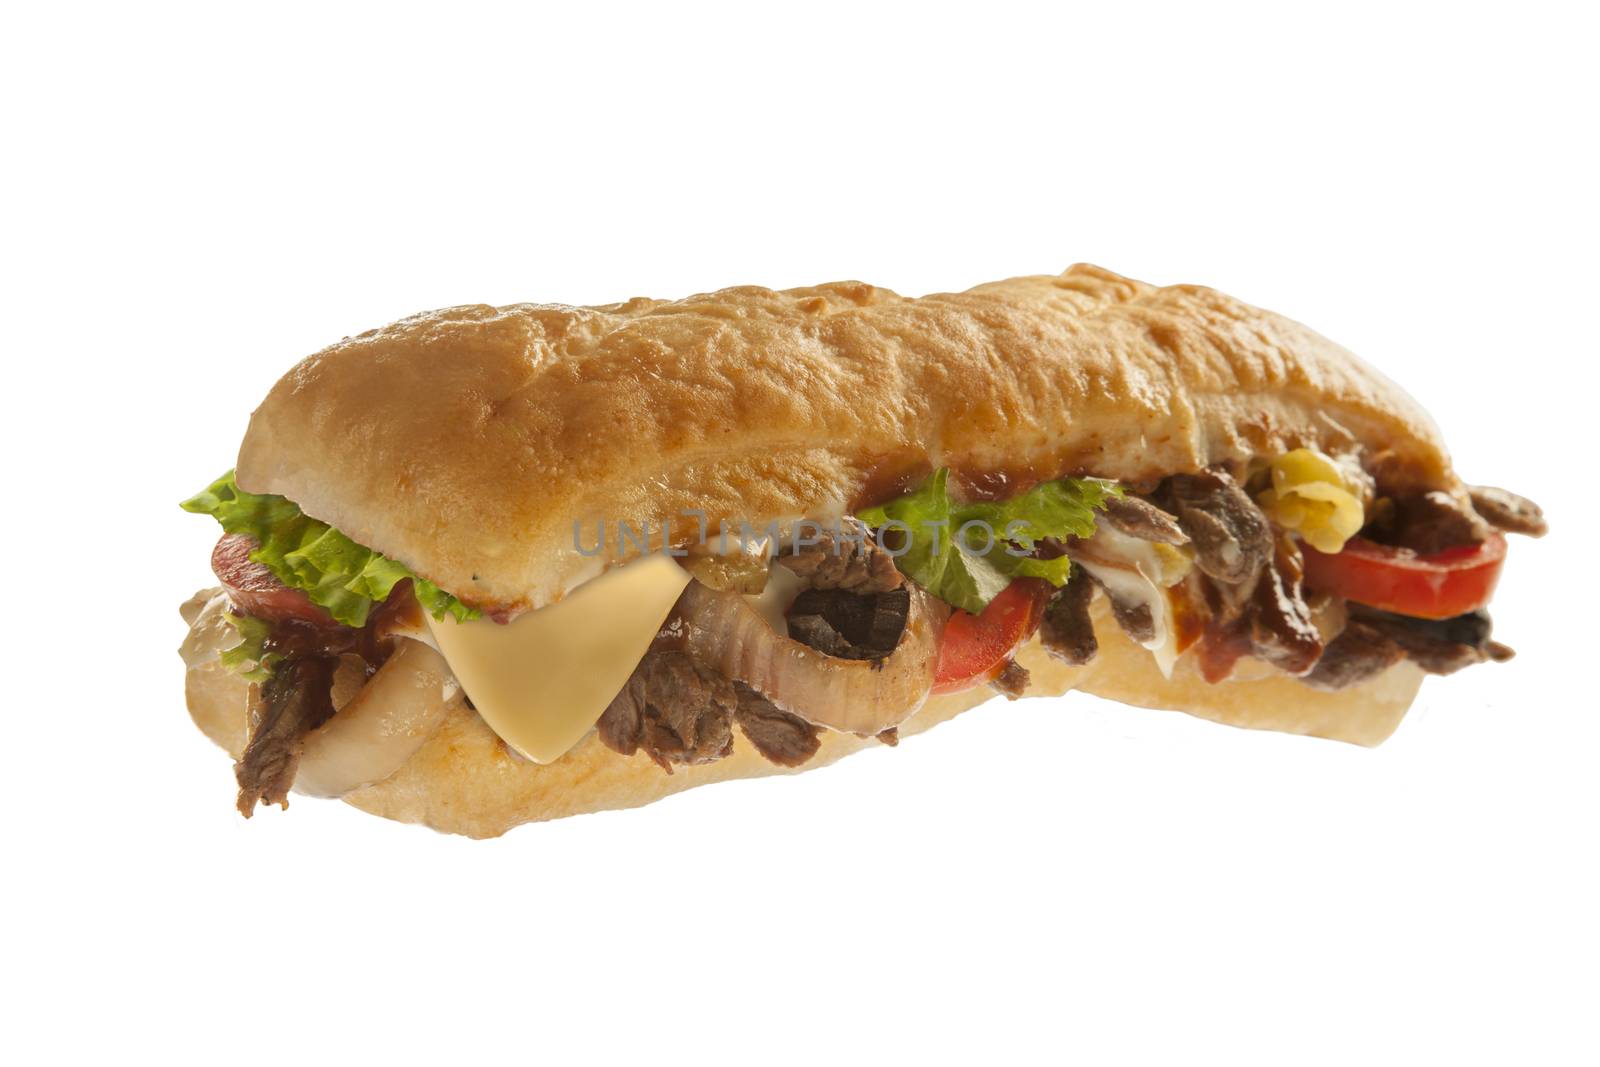 Sub Hoagie Sandwich with meat and veggies